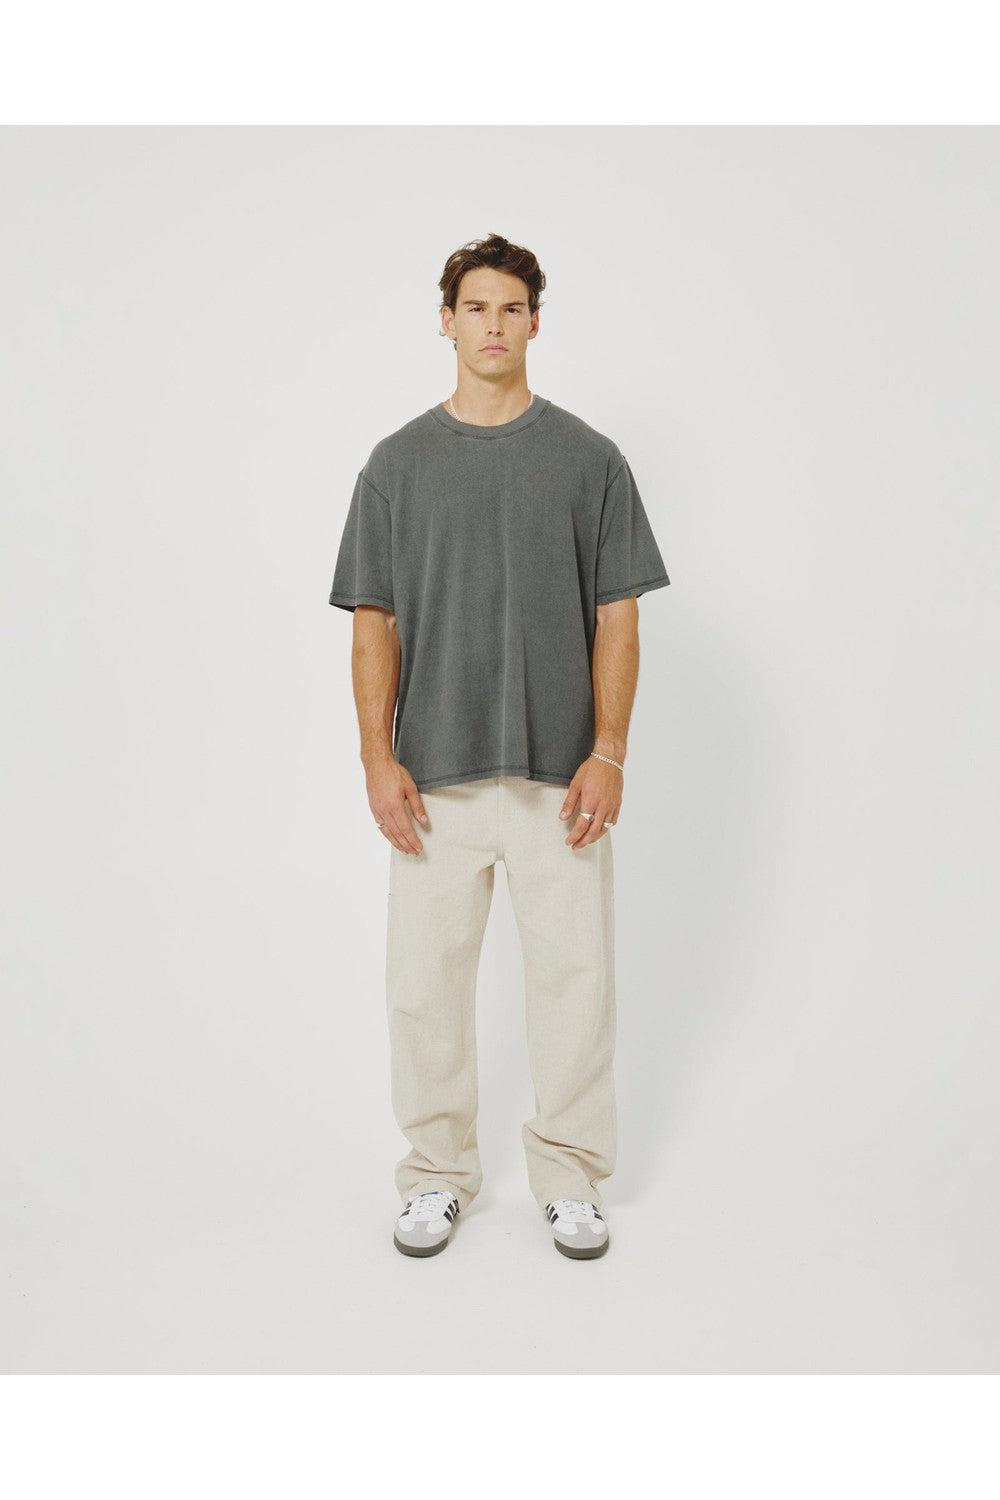 HEMP JERSEY SS / VINTAGE GREY | COMMONERS | Mad About The Boy